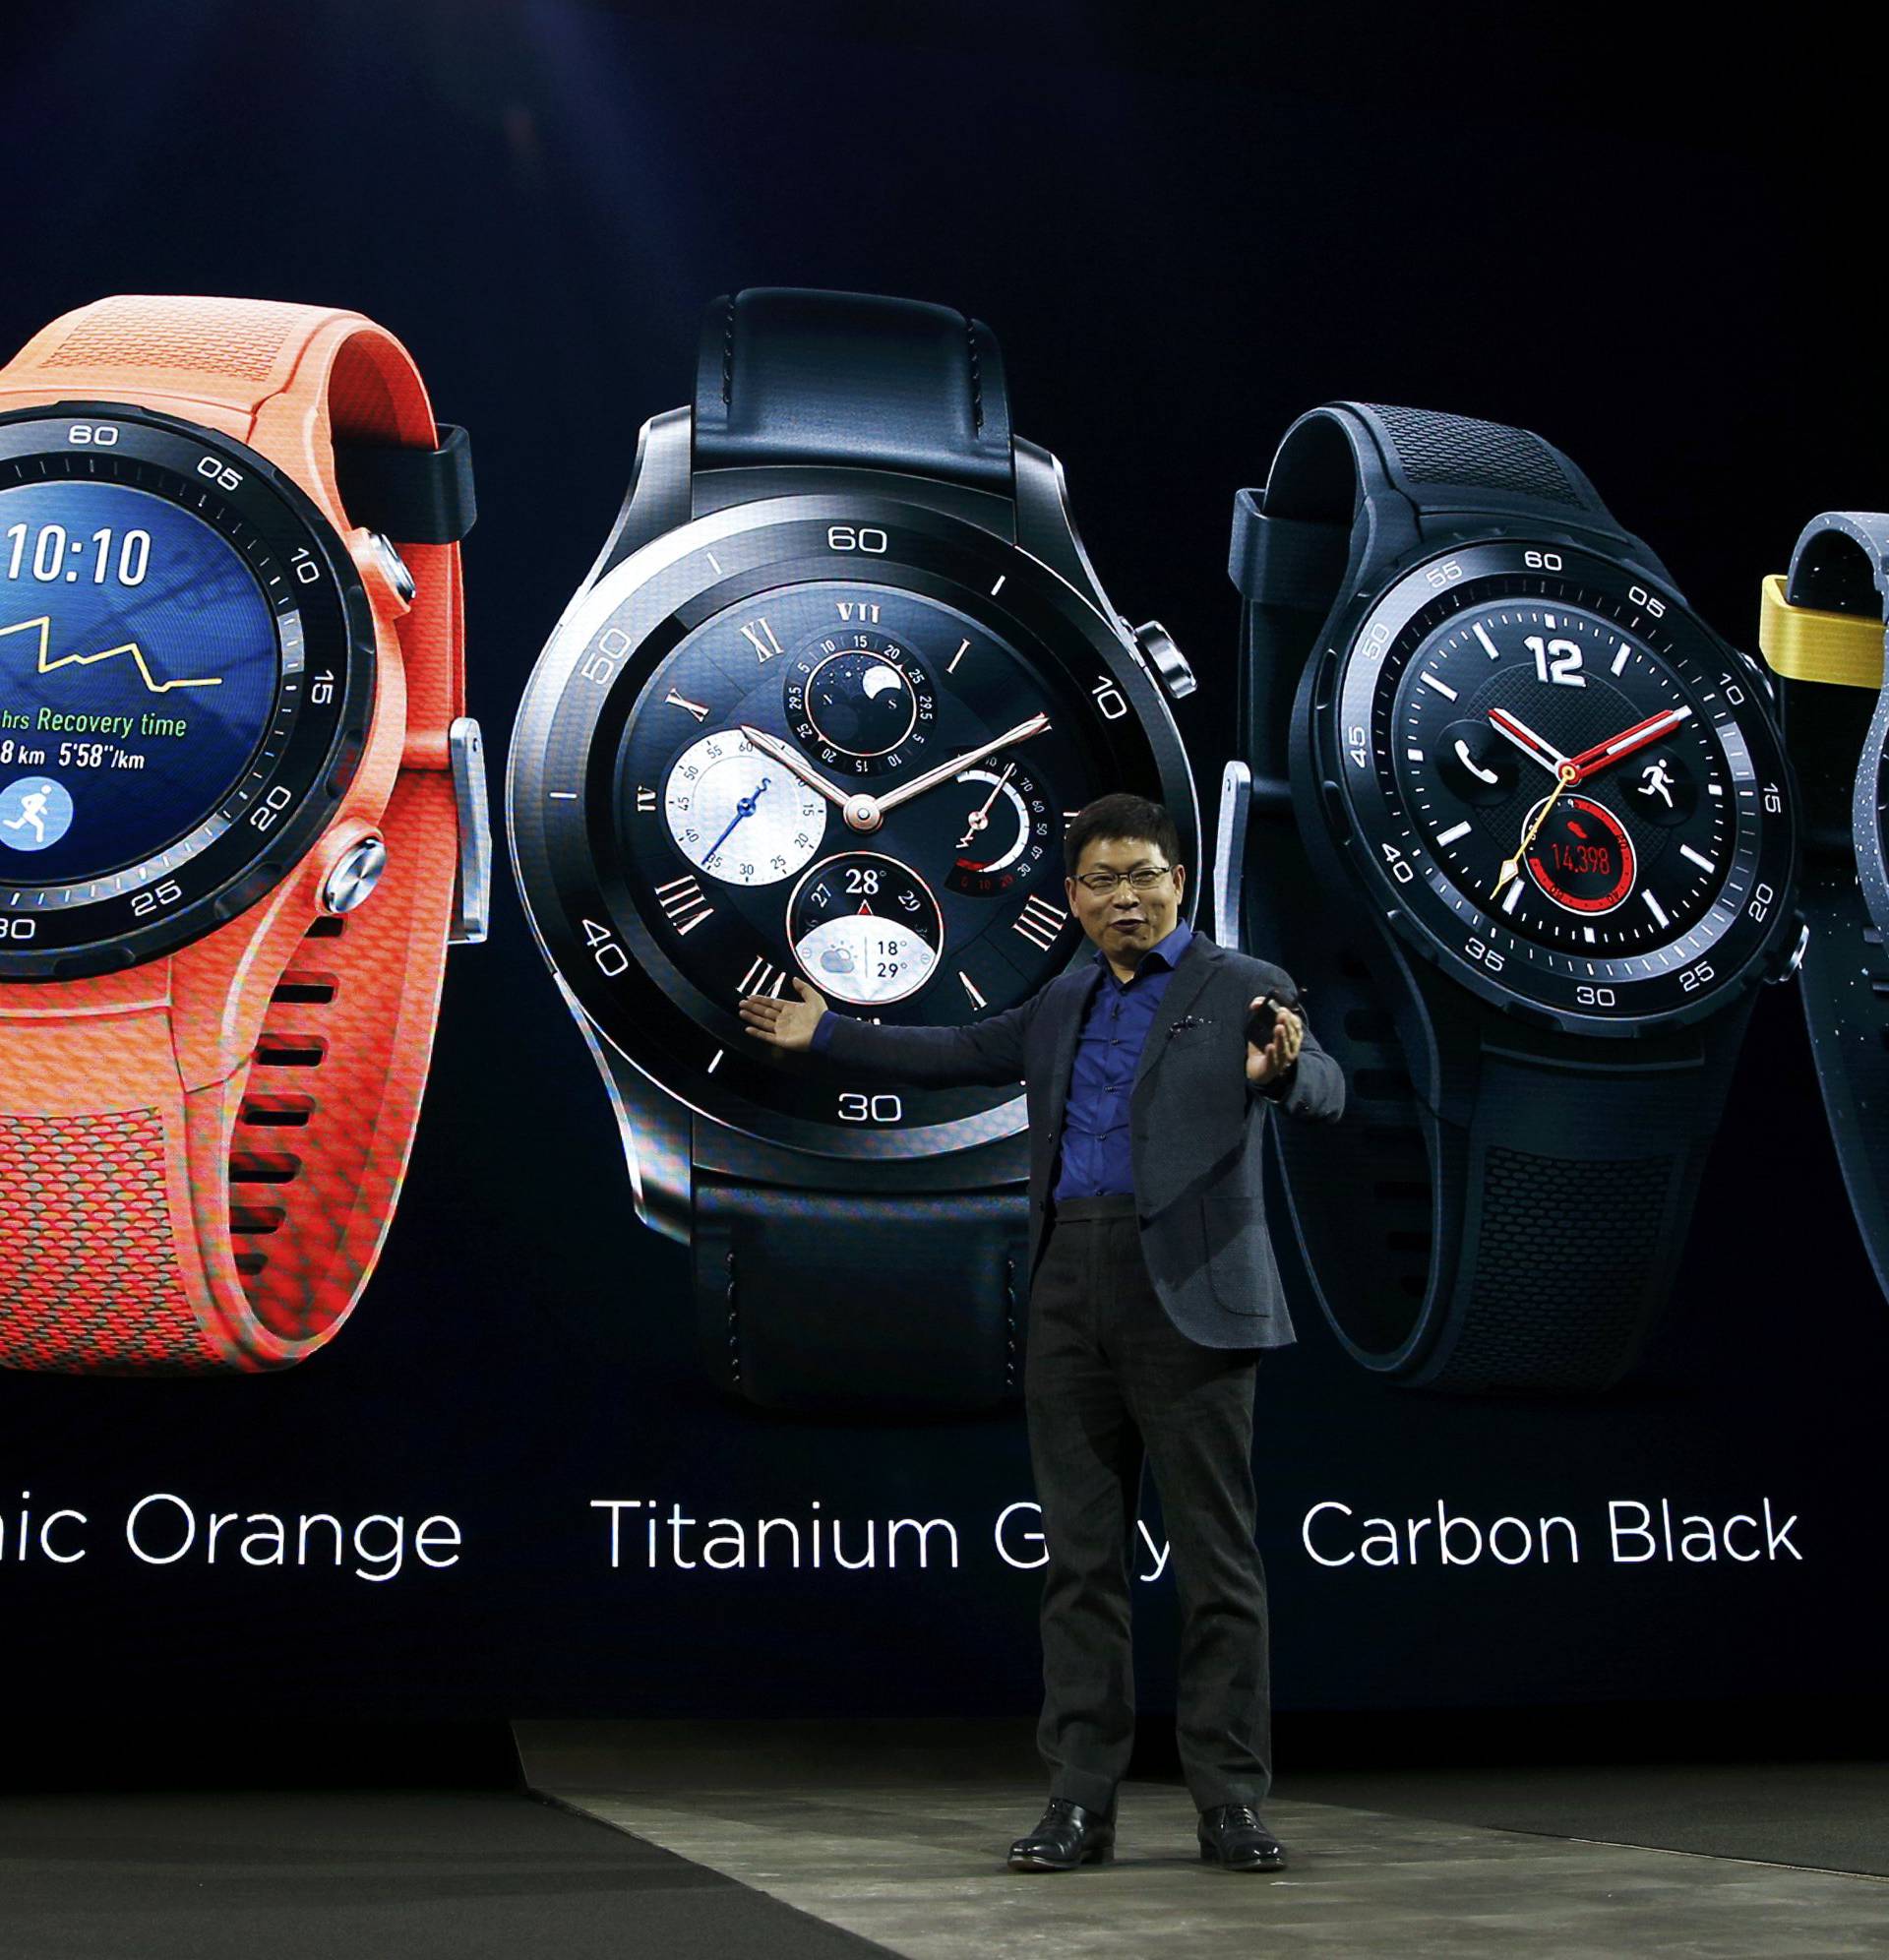 Yu, chief executive of Huawei's consumer business, speaks during presentation ceremony of new smartwatch, the Watch 2, at Mobile World Congress in Barcelona